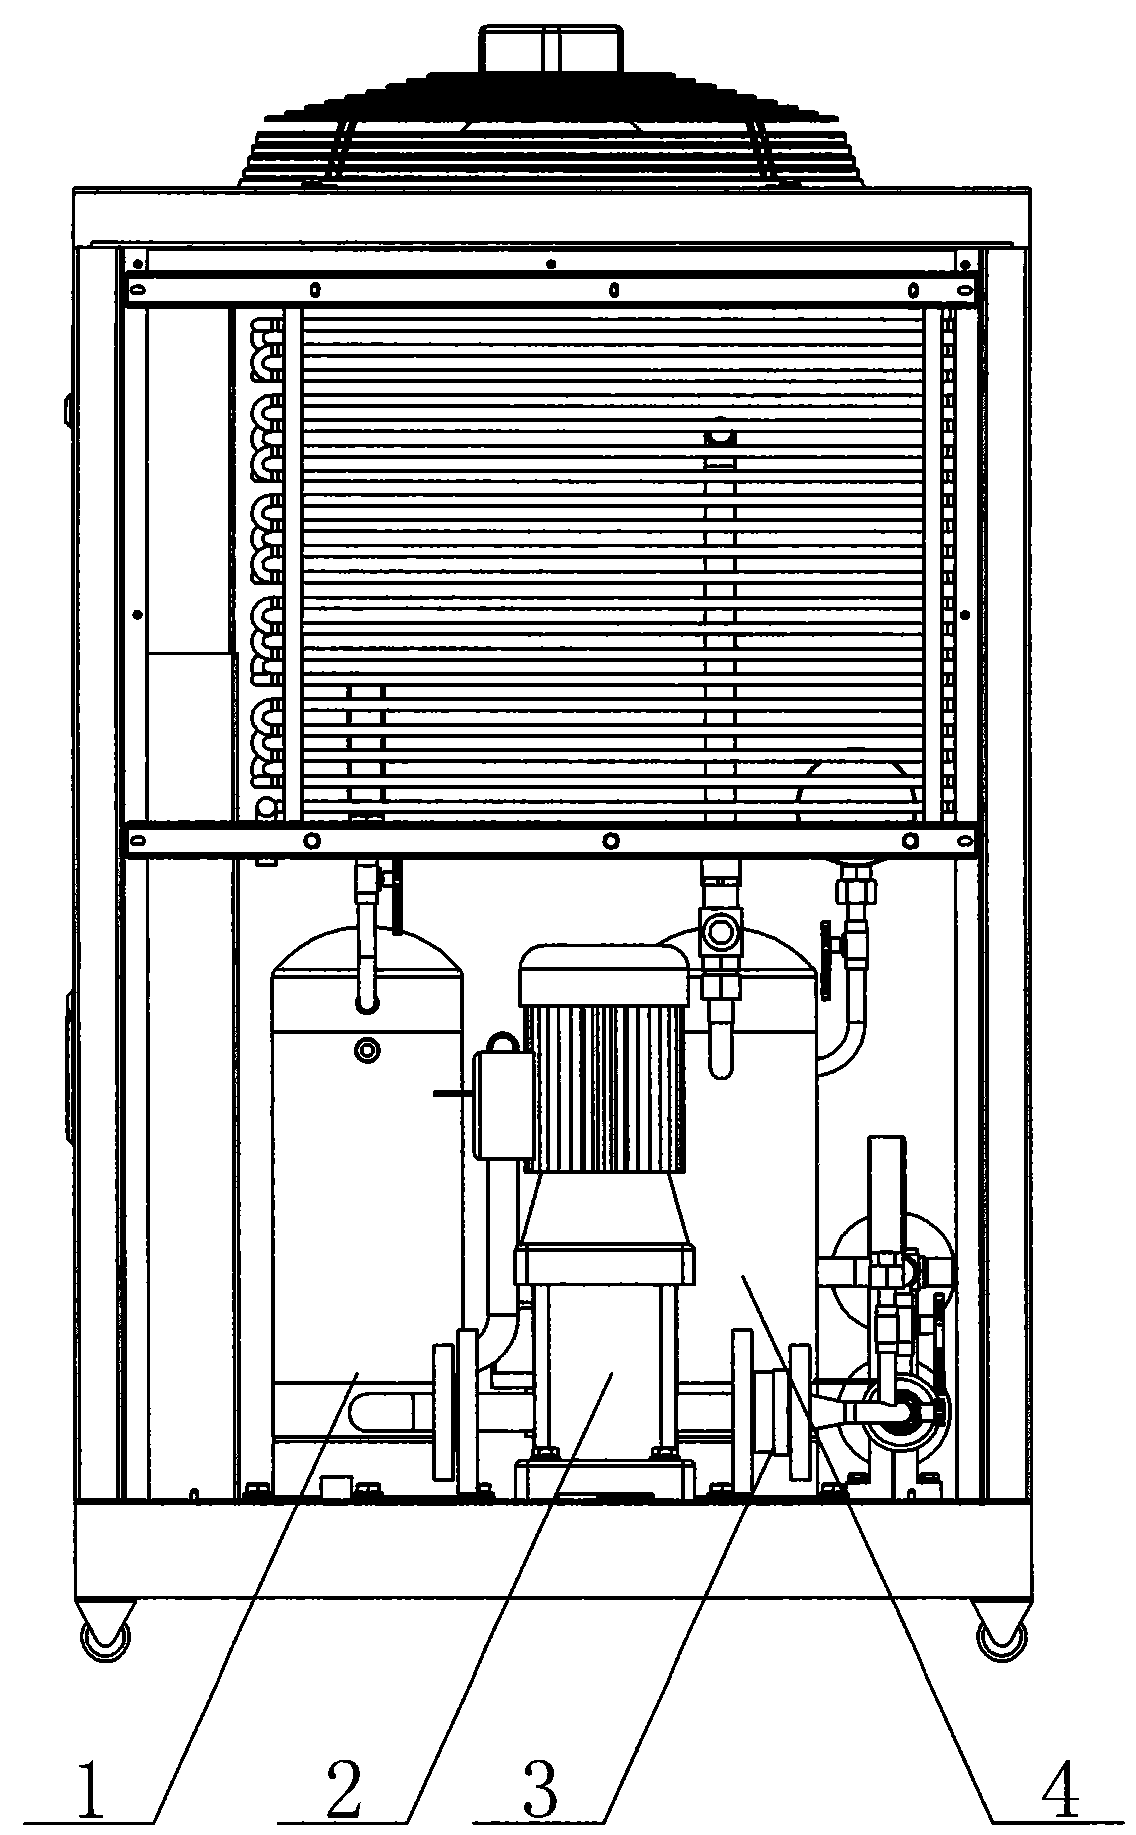 A two-phase cooling system based on r134a